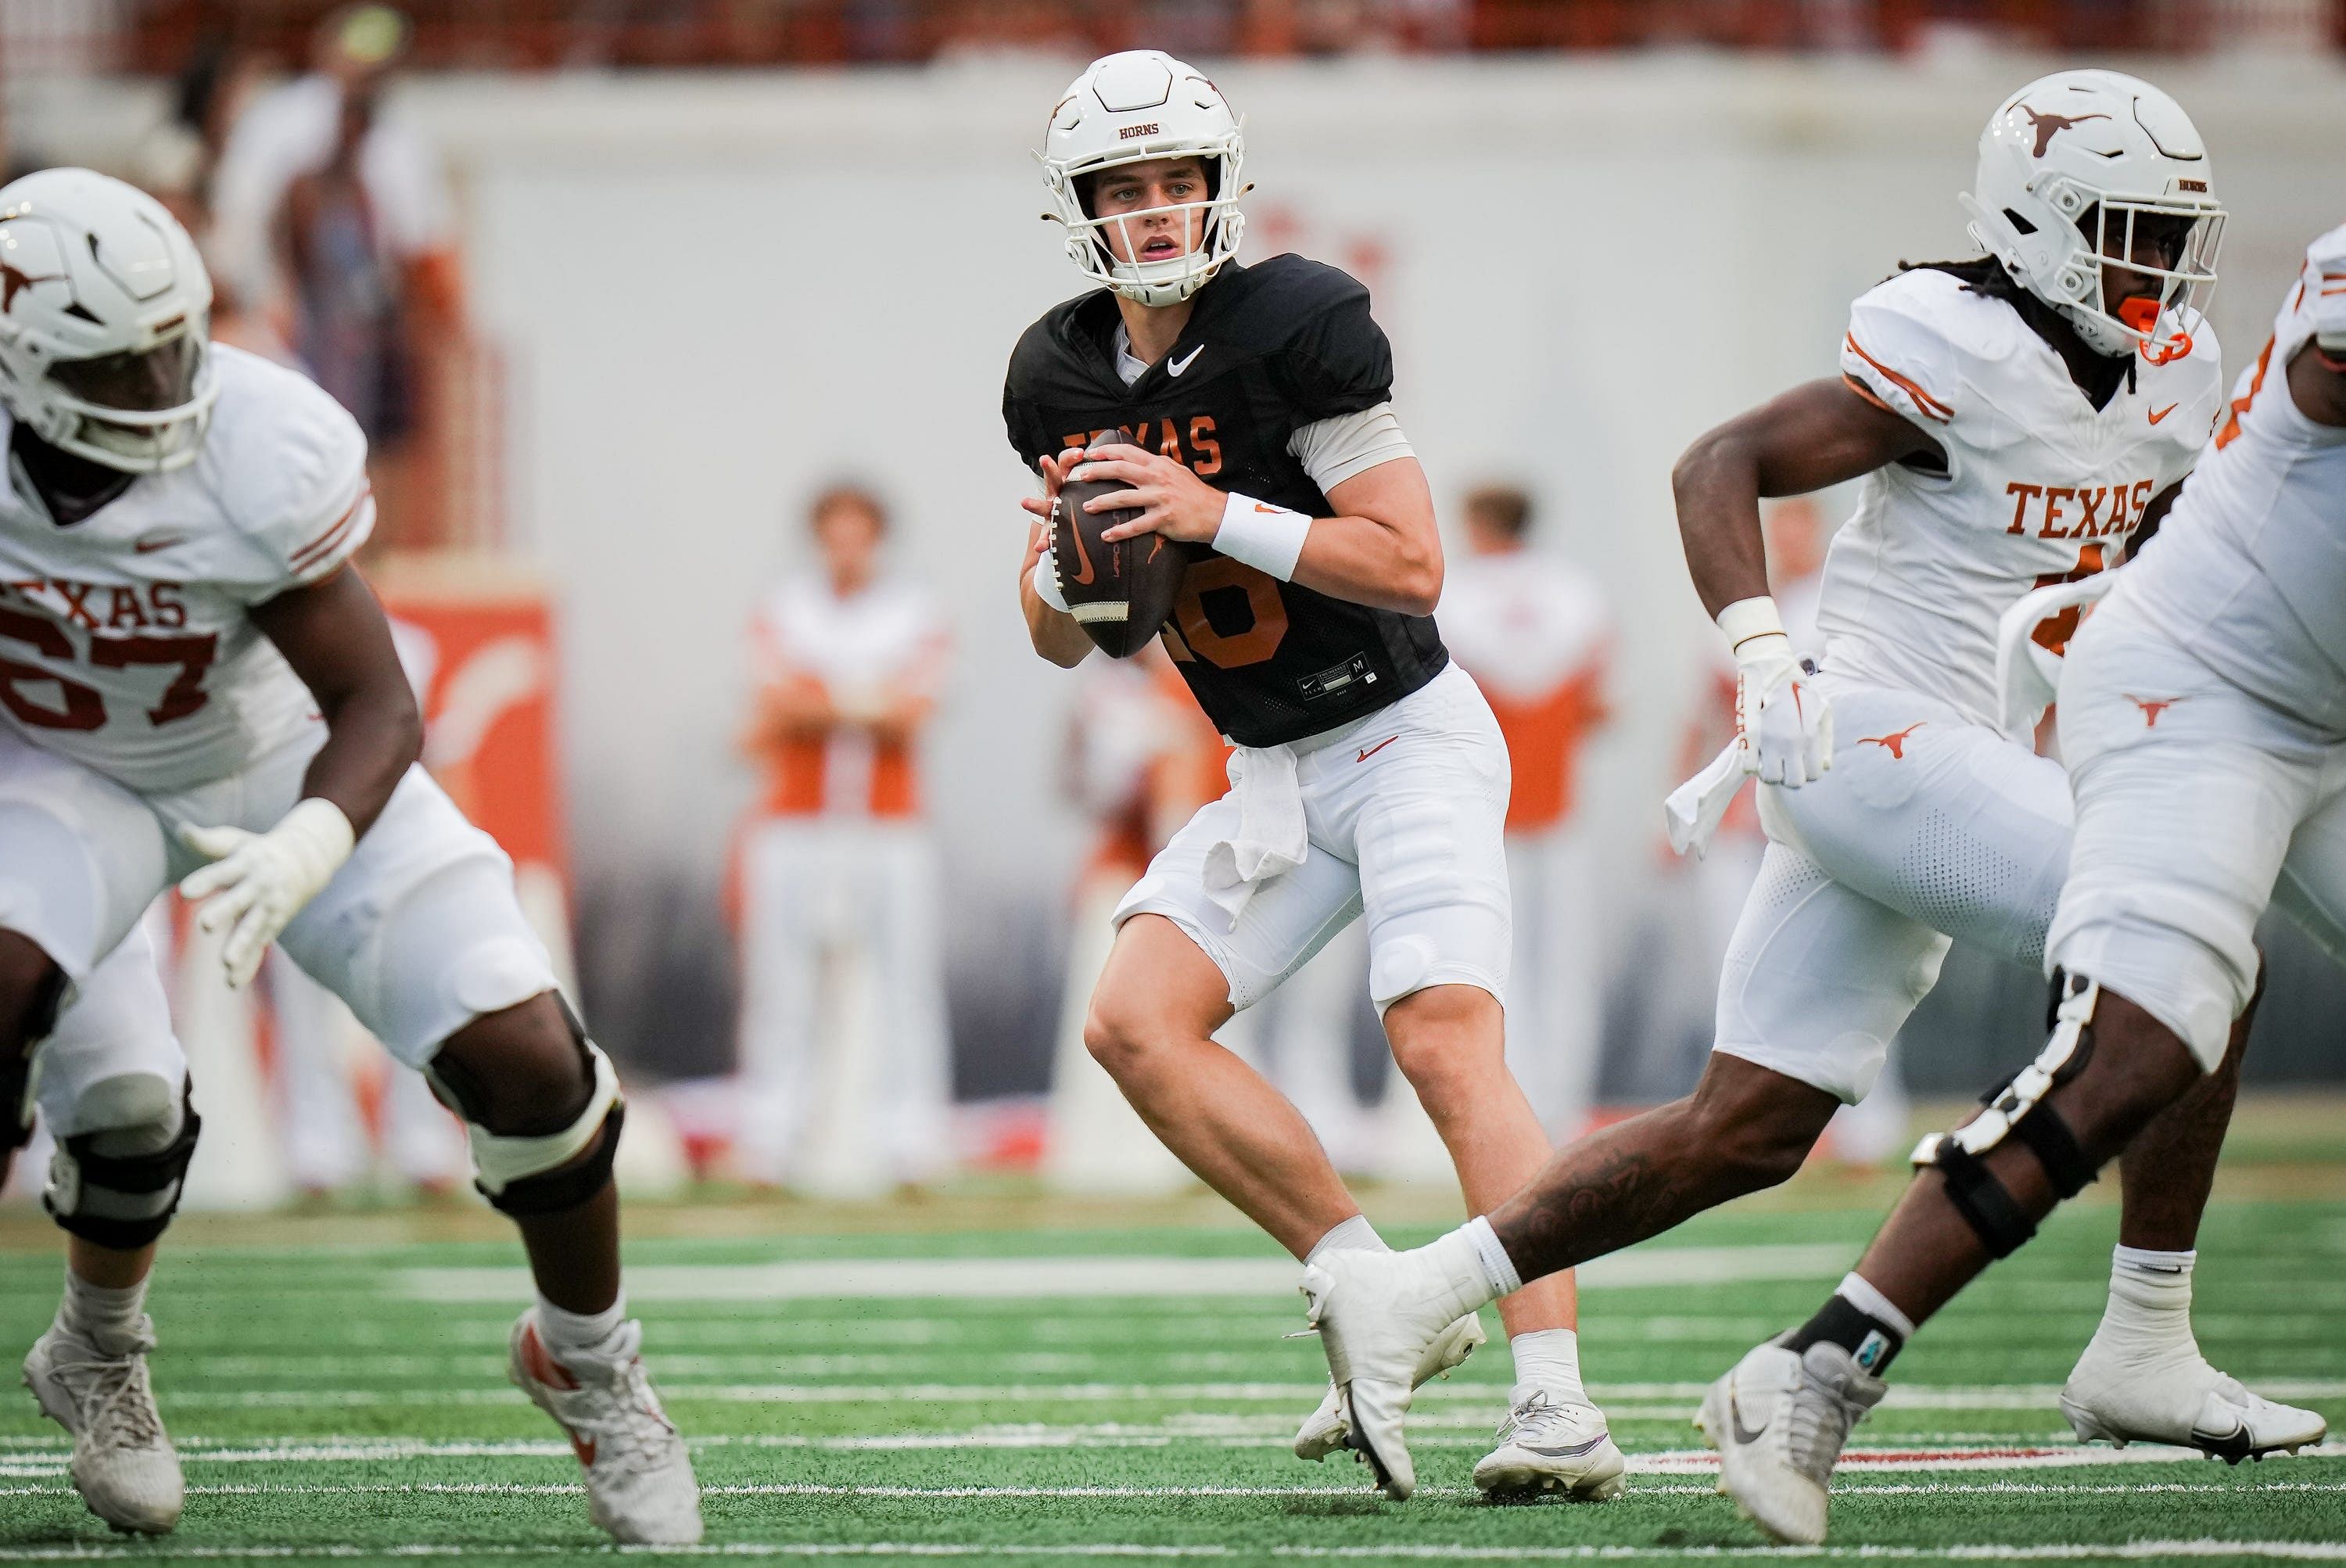 Texas and backup QB Arch Manning could challenge for the college football national title this fall.